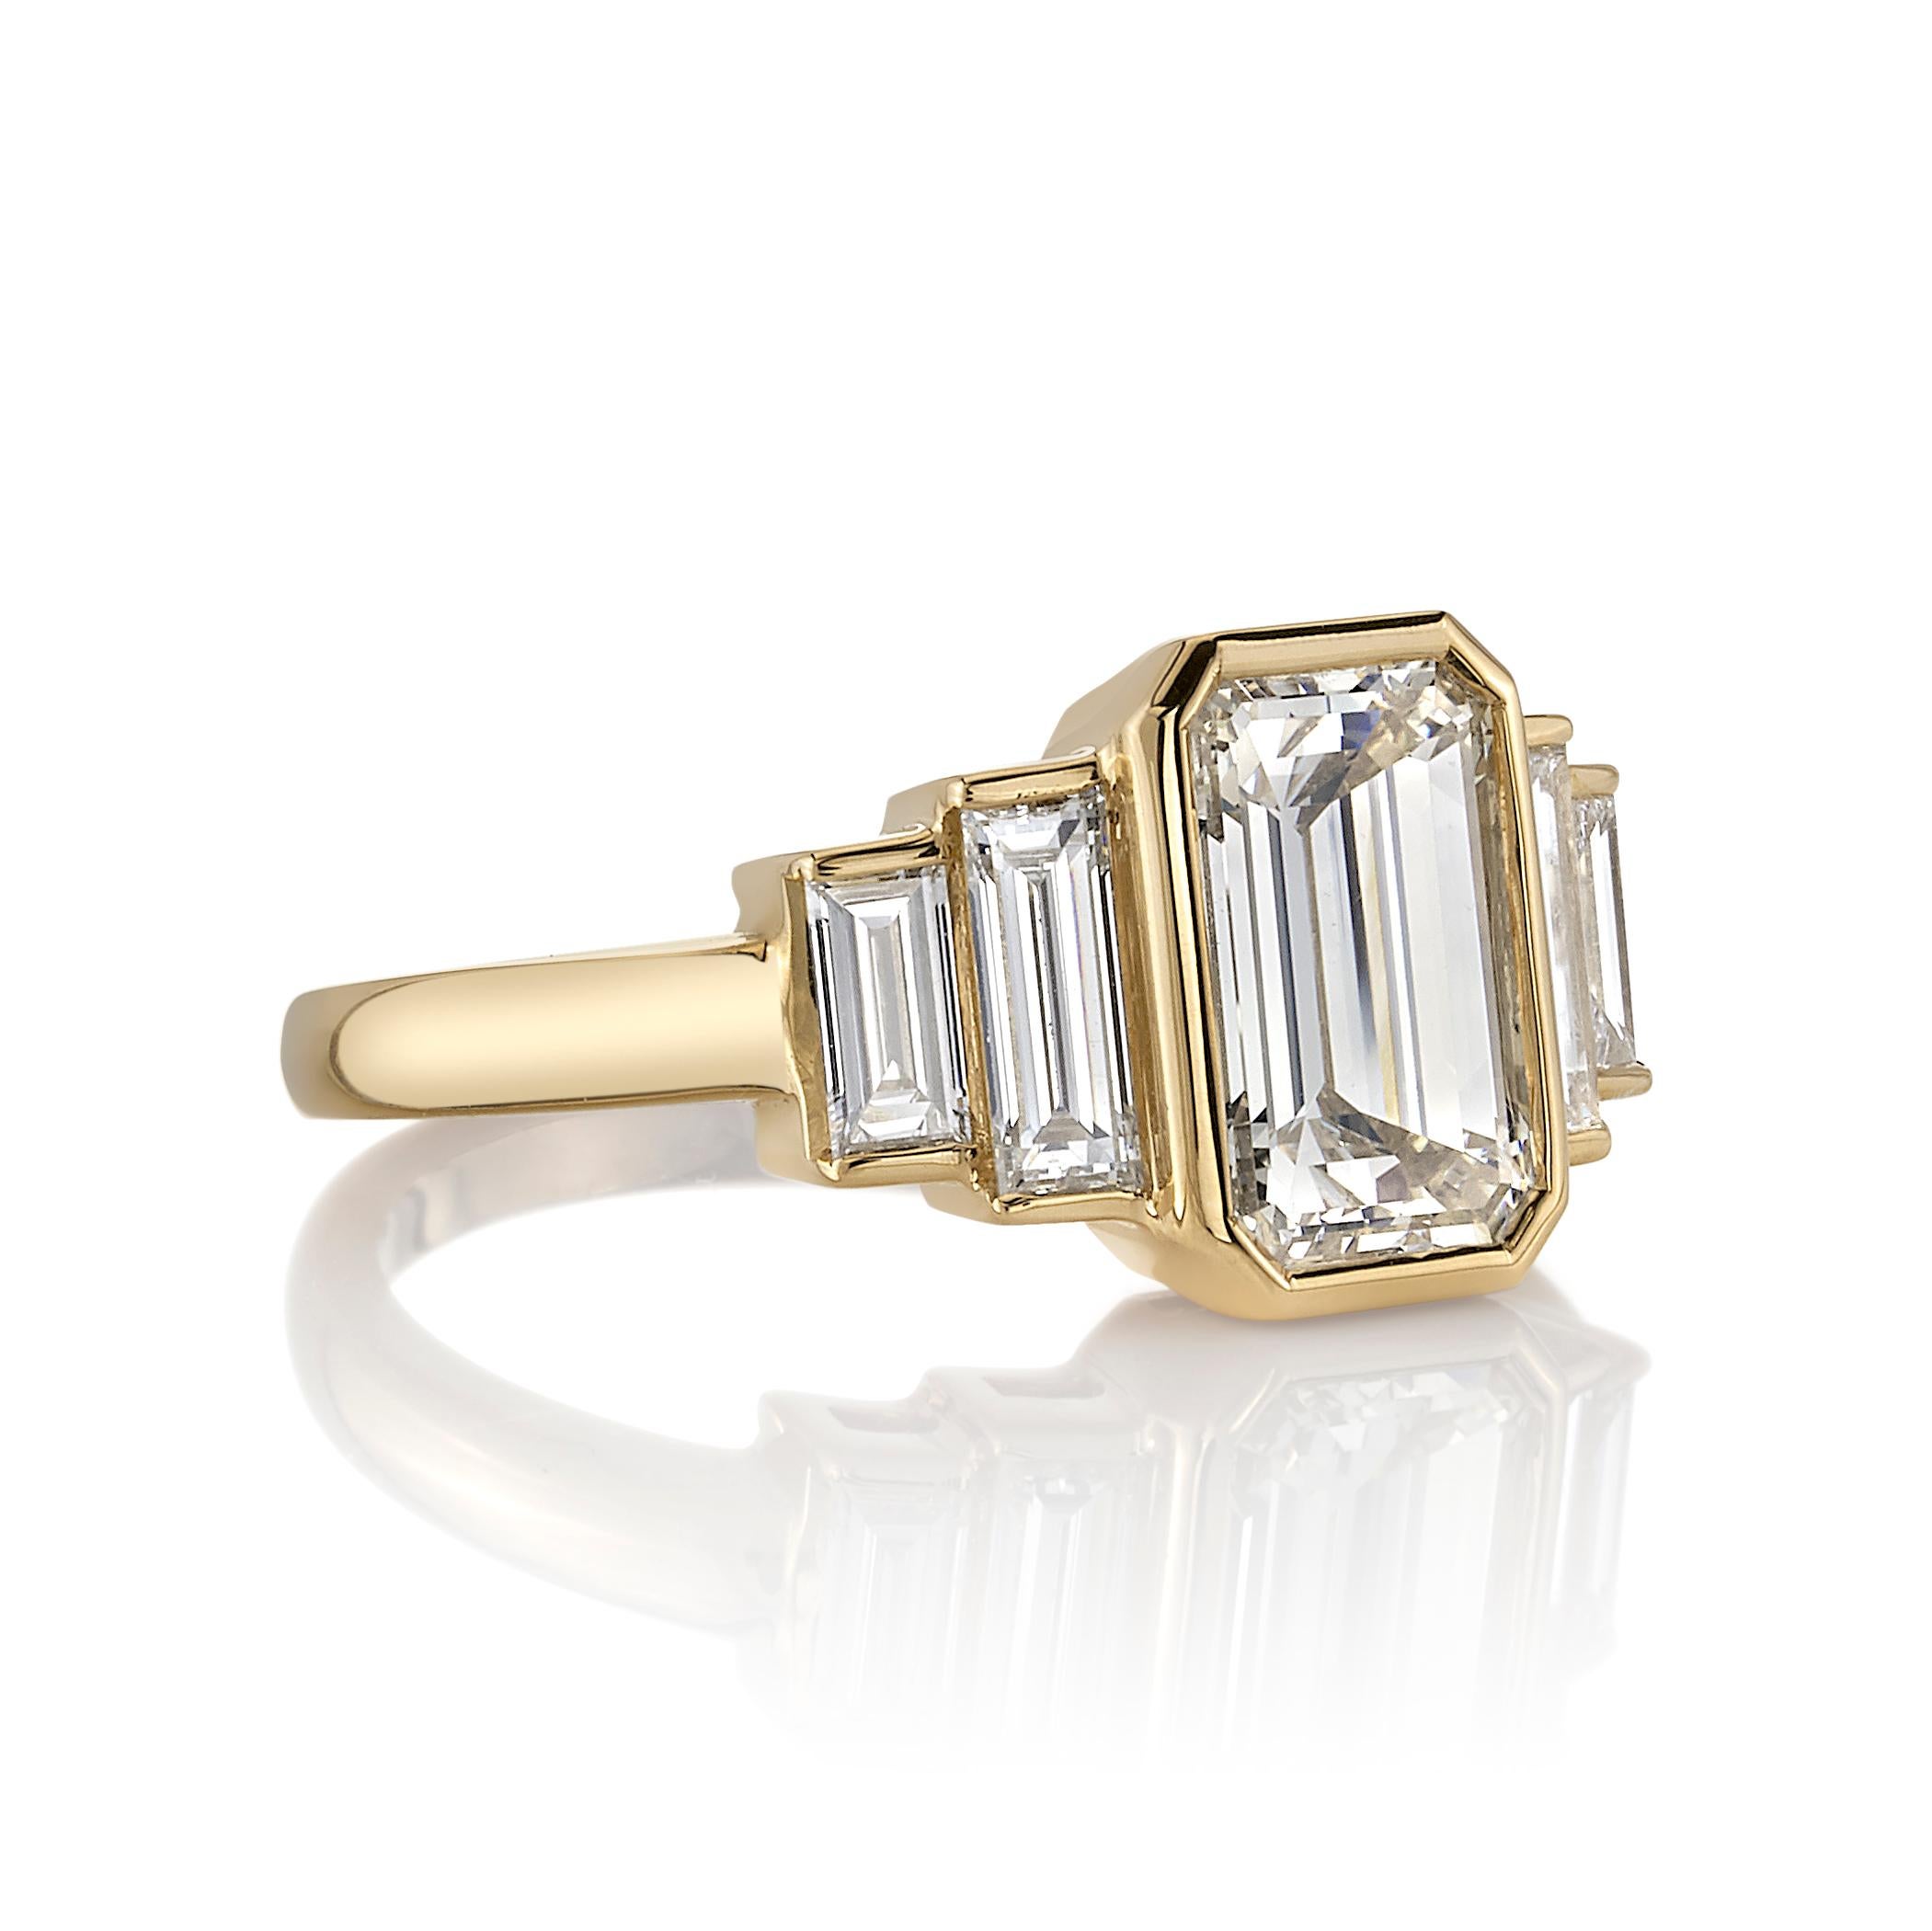 1.74ctw N/VS2 GIA certified Emerald cut diamond set in a handcrafted 18K yellow gold ring.

Ring is currently a size 6 and can be sized to fit.